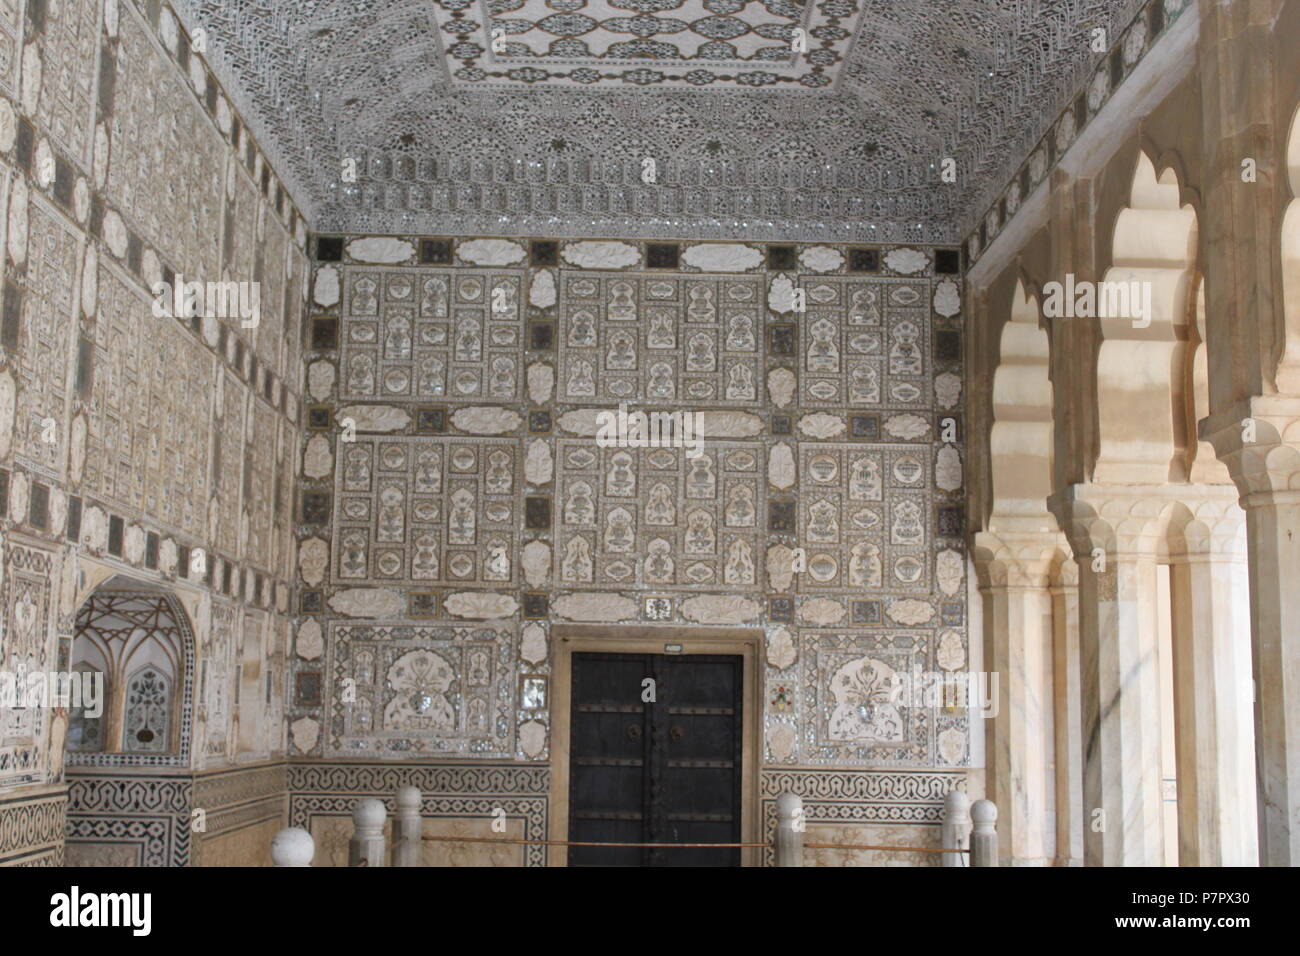 Sheesh mahal and also known as mirror palace is the magnificent piece of architecture built with beautiful precious stones and glass. Stock Photo